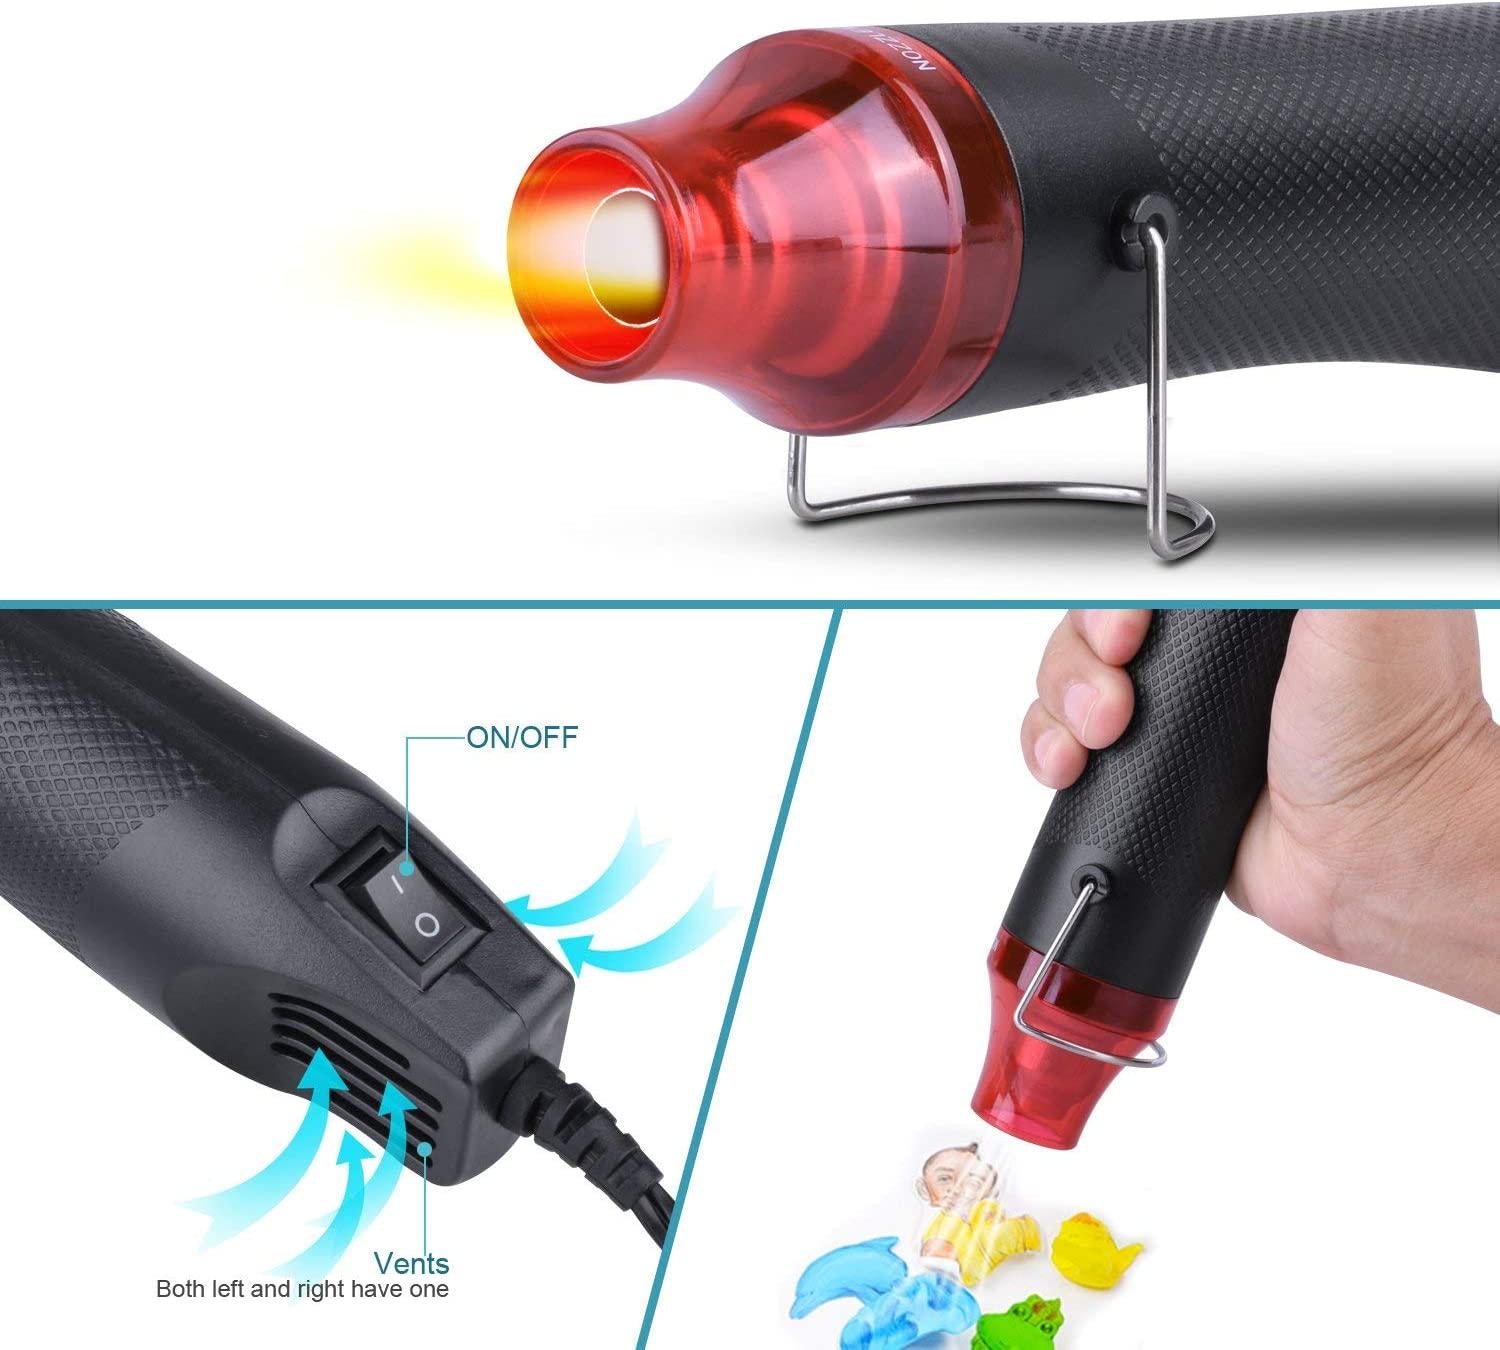 LECHI, LECHI Heat Gun Electric 130W 230V Mini Portable Hot Air Gun for DIY Craft Embossing, Shrink Wrapping PVC, Drying Paint, Clay, Rubber Stamp, Multi Function Hand-Hold Heat Tools UK Plug